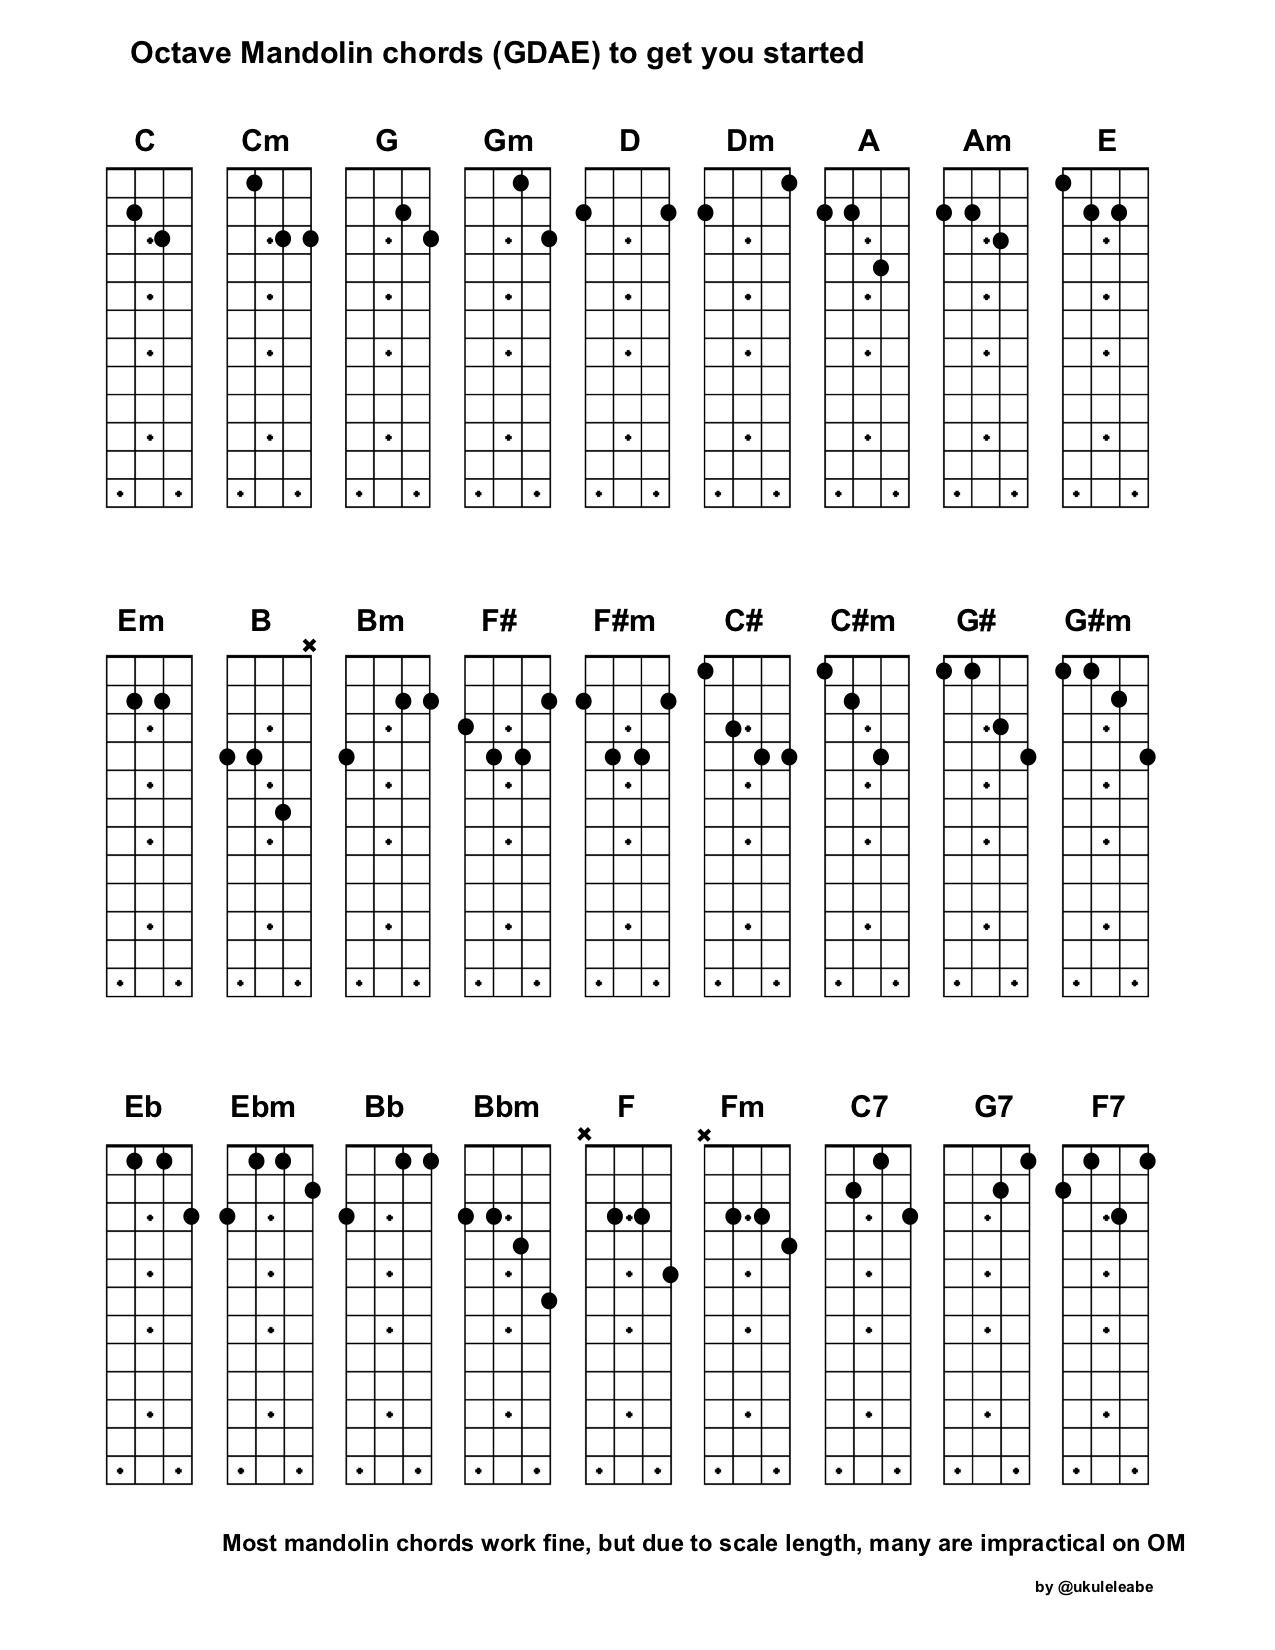 Mandolin Chord Chart I Made A Chord Chart For Octave Mandolin To Have A Quick Reference